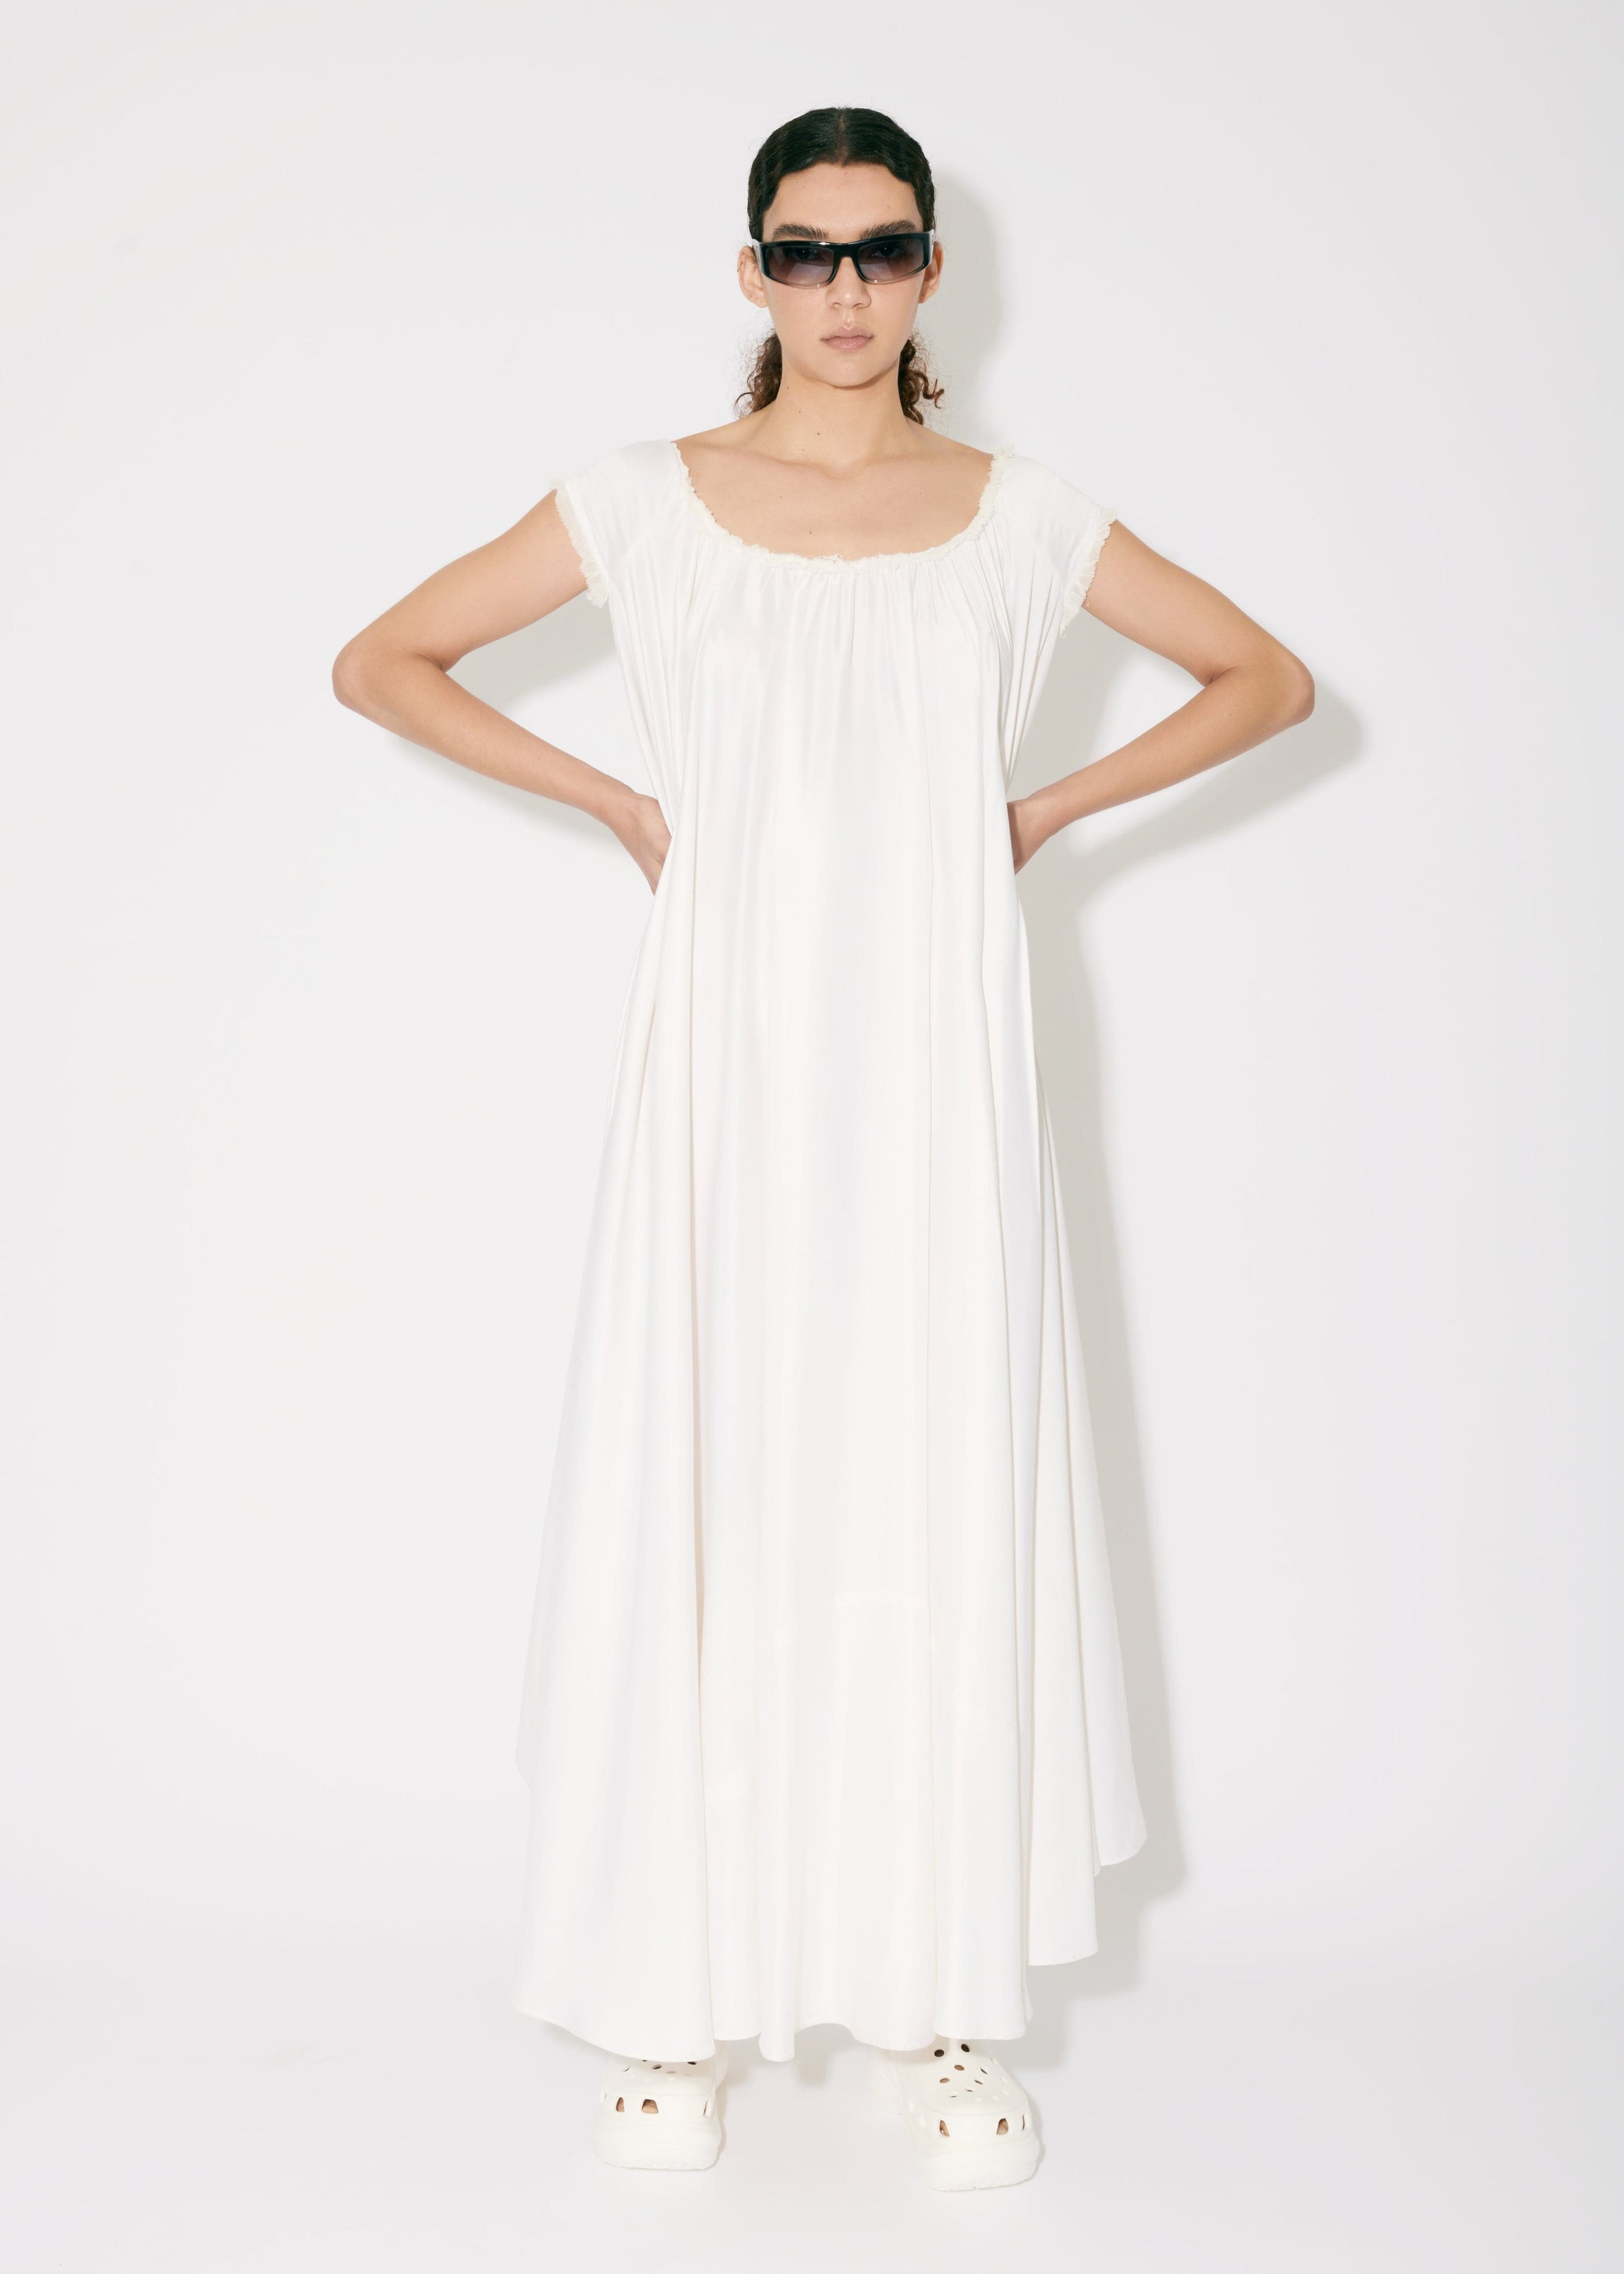 JaneBooke Lady of Shallot Dress in White